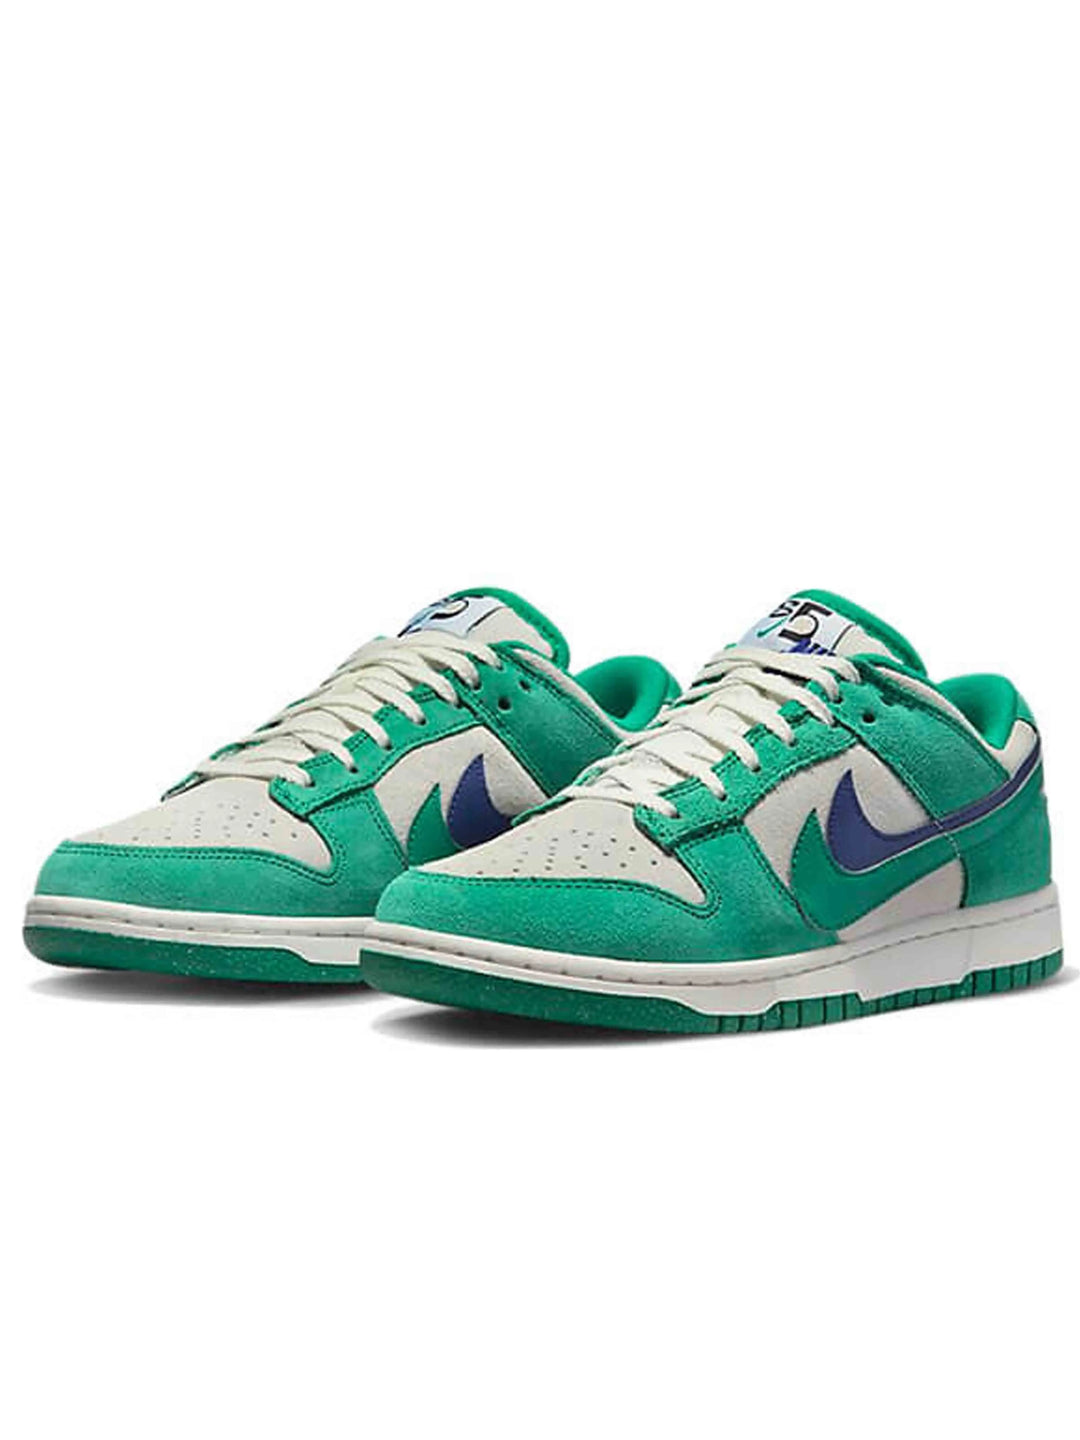 Nike Dunk Low SE 85 Neptune Green [W] Prior